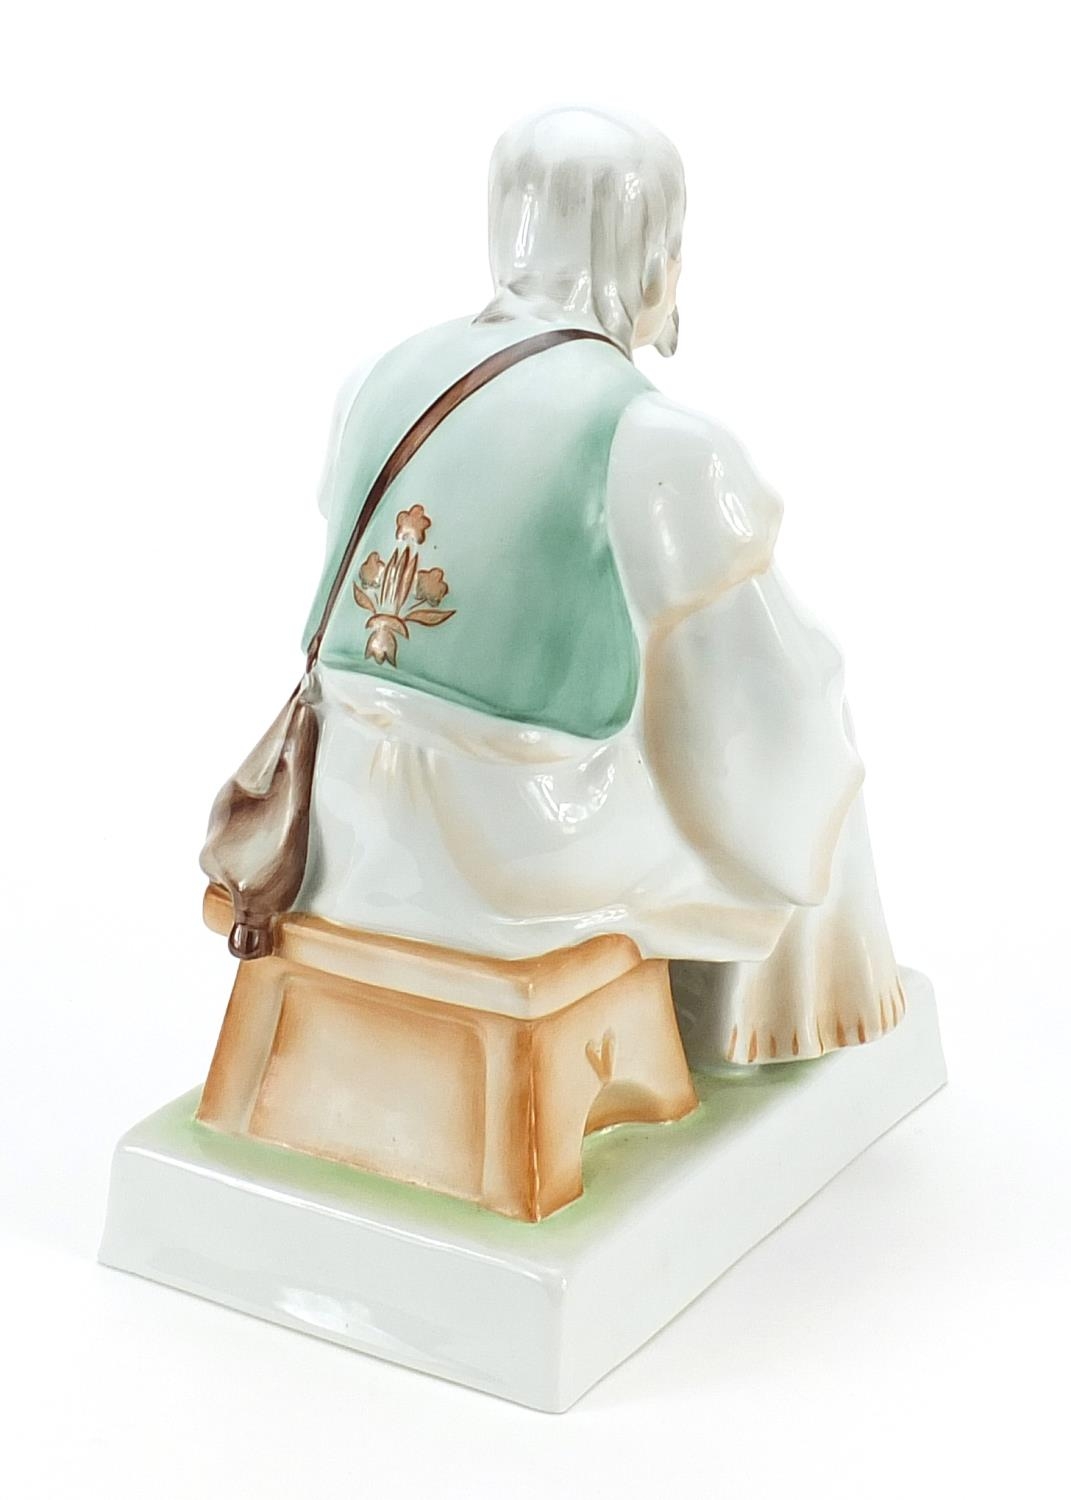 Zsolnay Pecs, Hungarian porcelain seated gentleman, 32cm high - Image 2 of 4